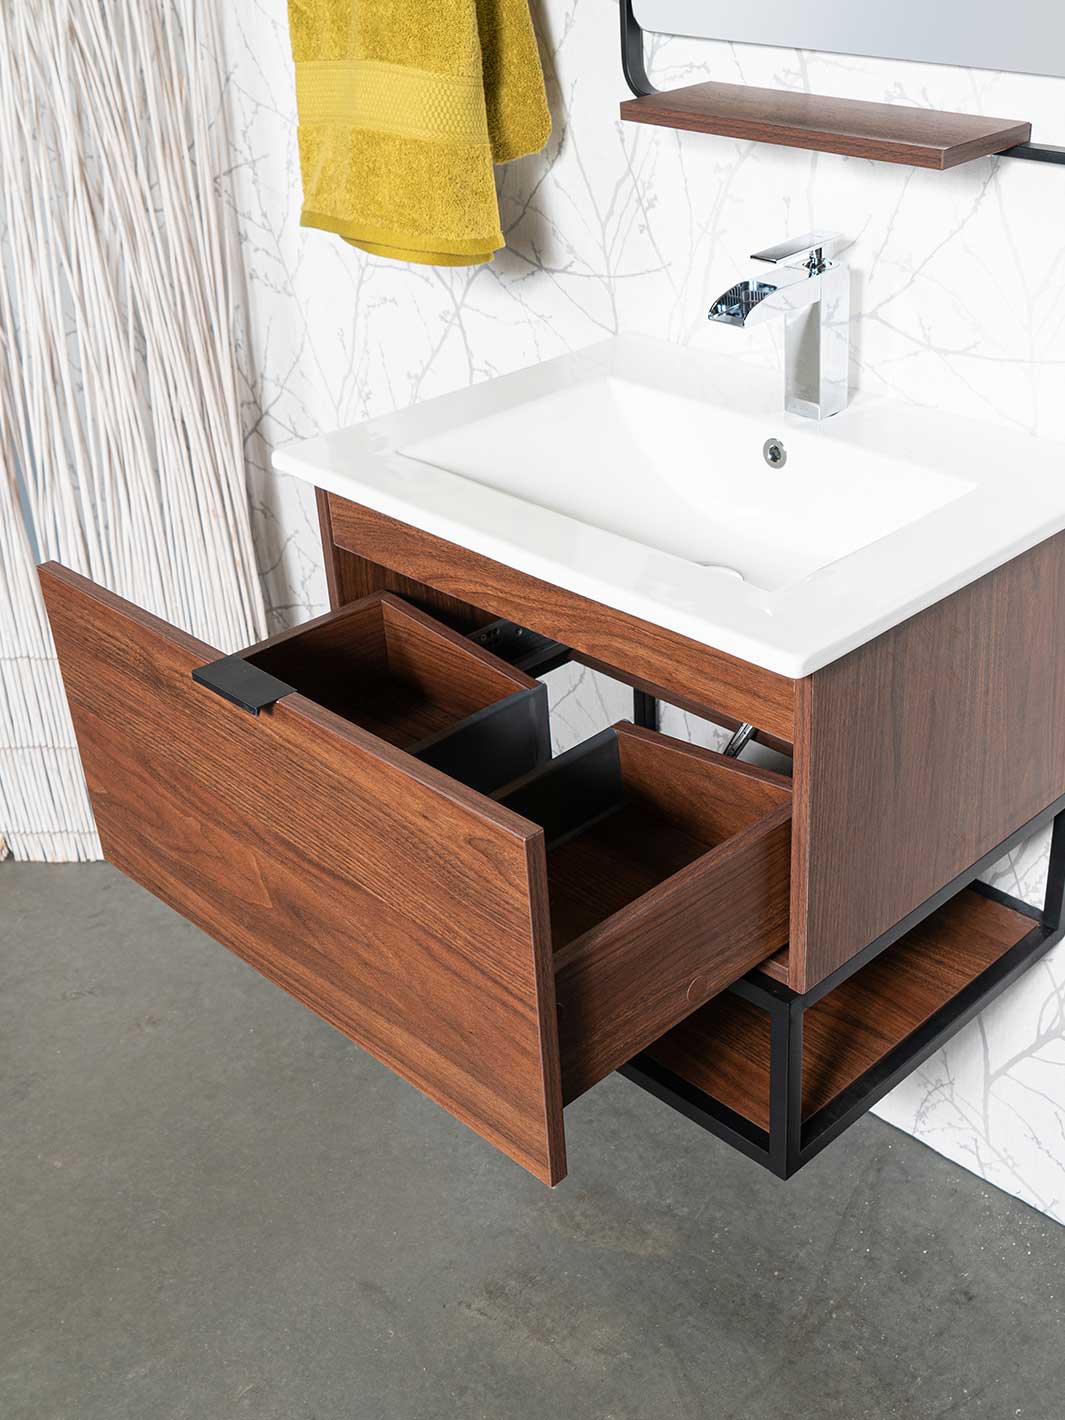 24 inch floating vanity wood grain finish with drawer, shelf, and white ceramic sink 